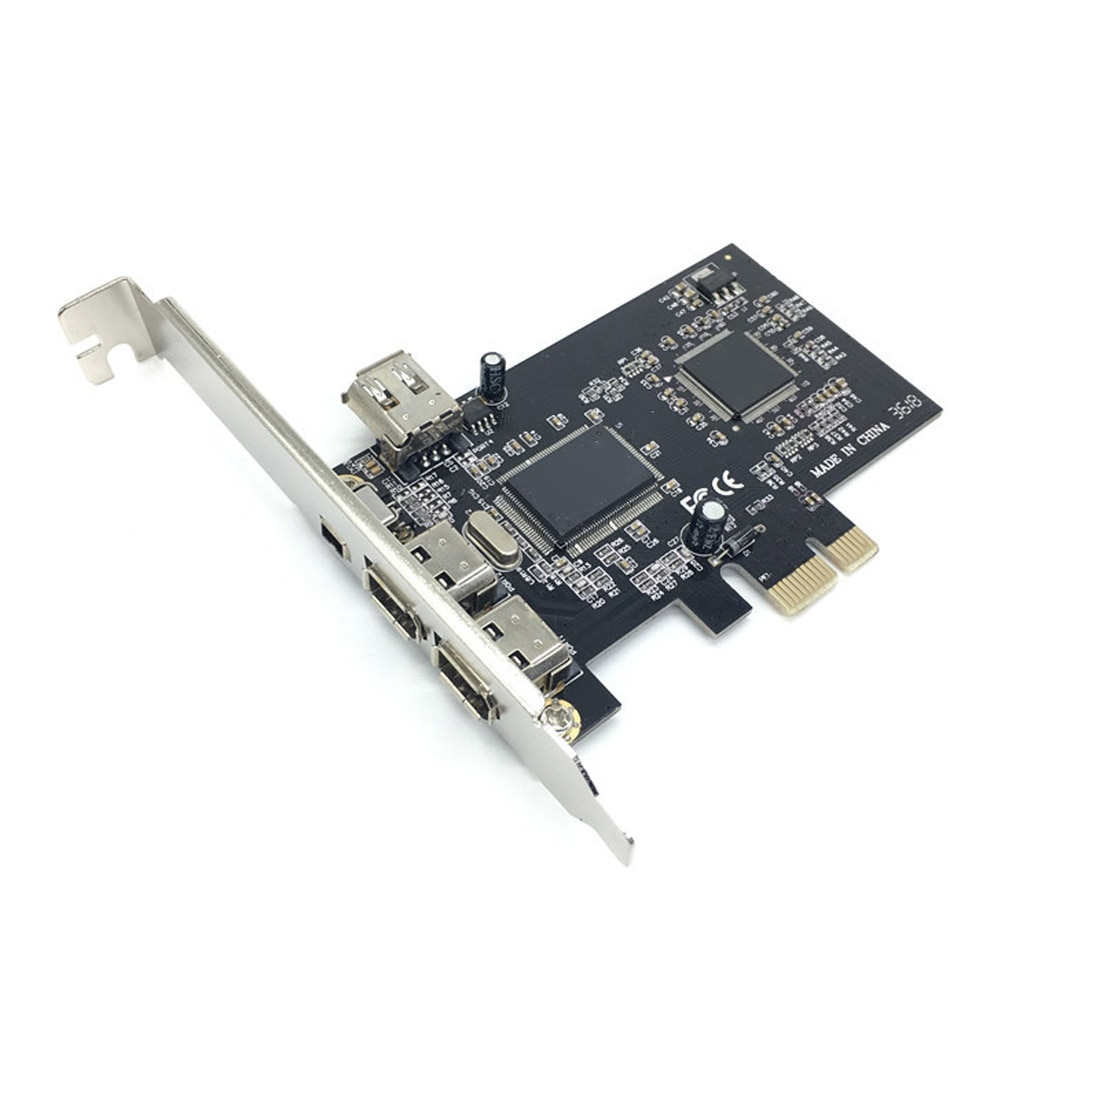 XT-XINTE PCIe 3 Port 1394A Firewire Expansion PCI Express to IEEE 1394 Adapter Controller 2 x 6 Pin And 1 x 4 Pin For Desktop